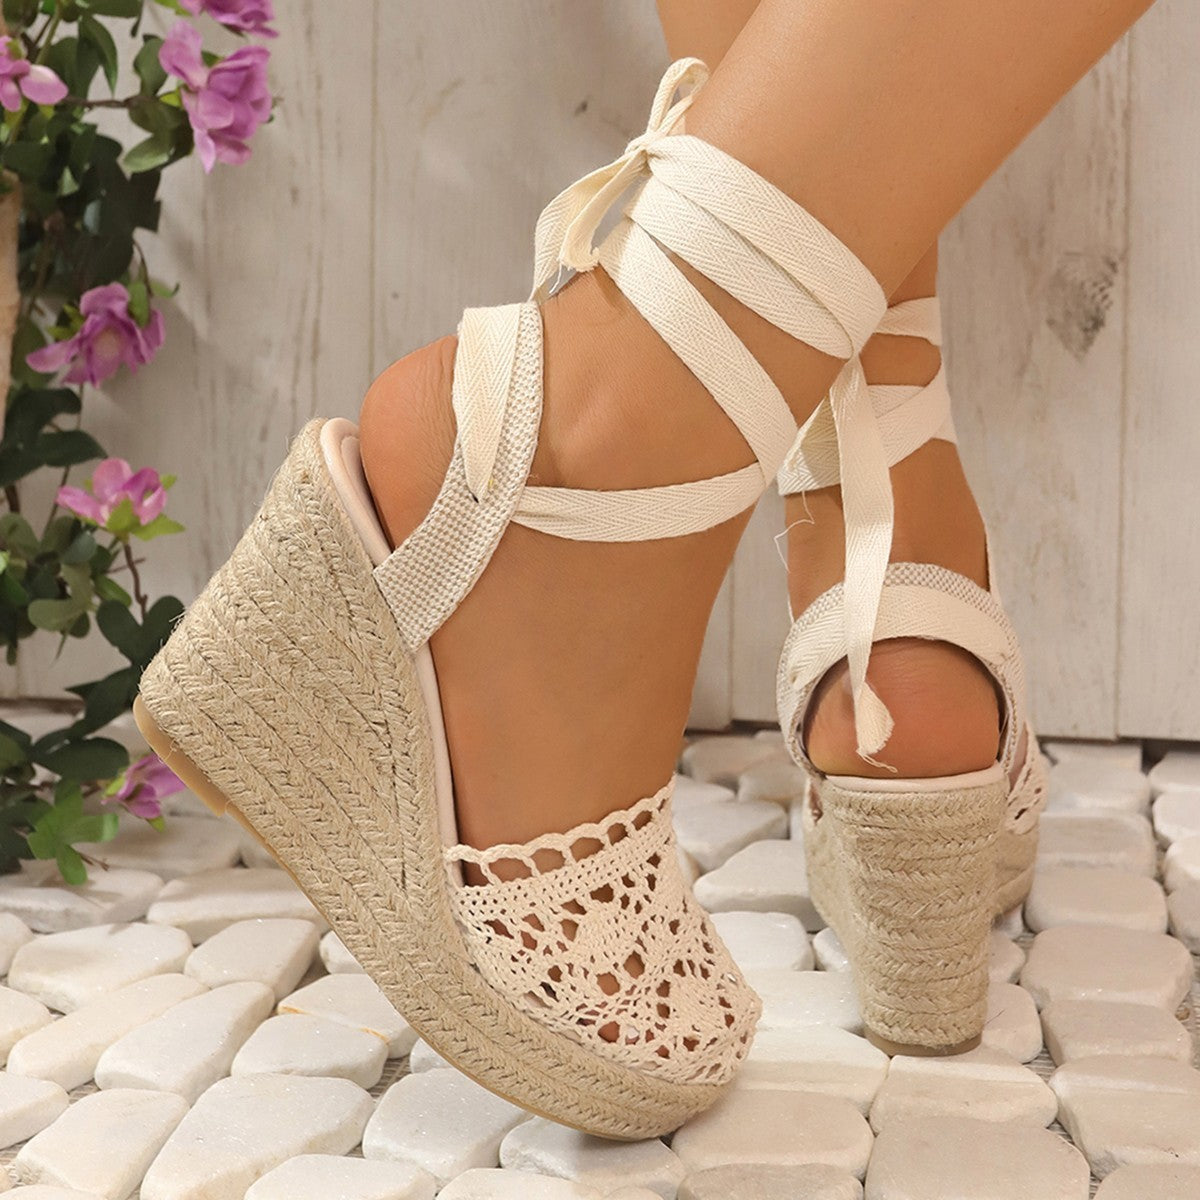 Women's Straw Woven Wedge High Heels Lace Lace-up Sandals